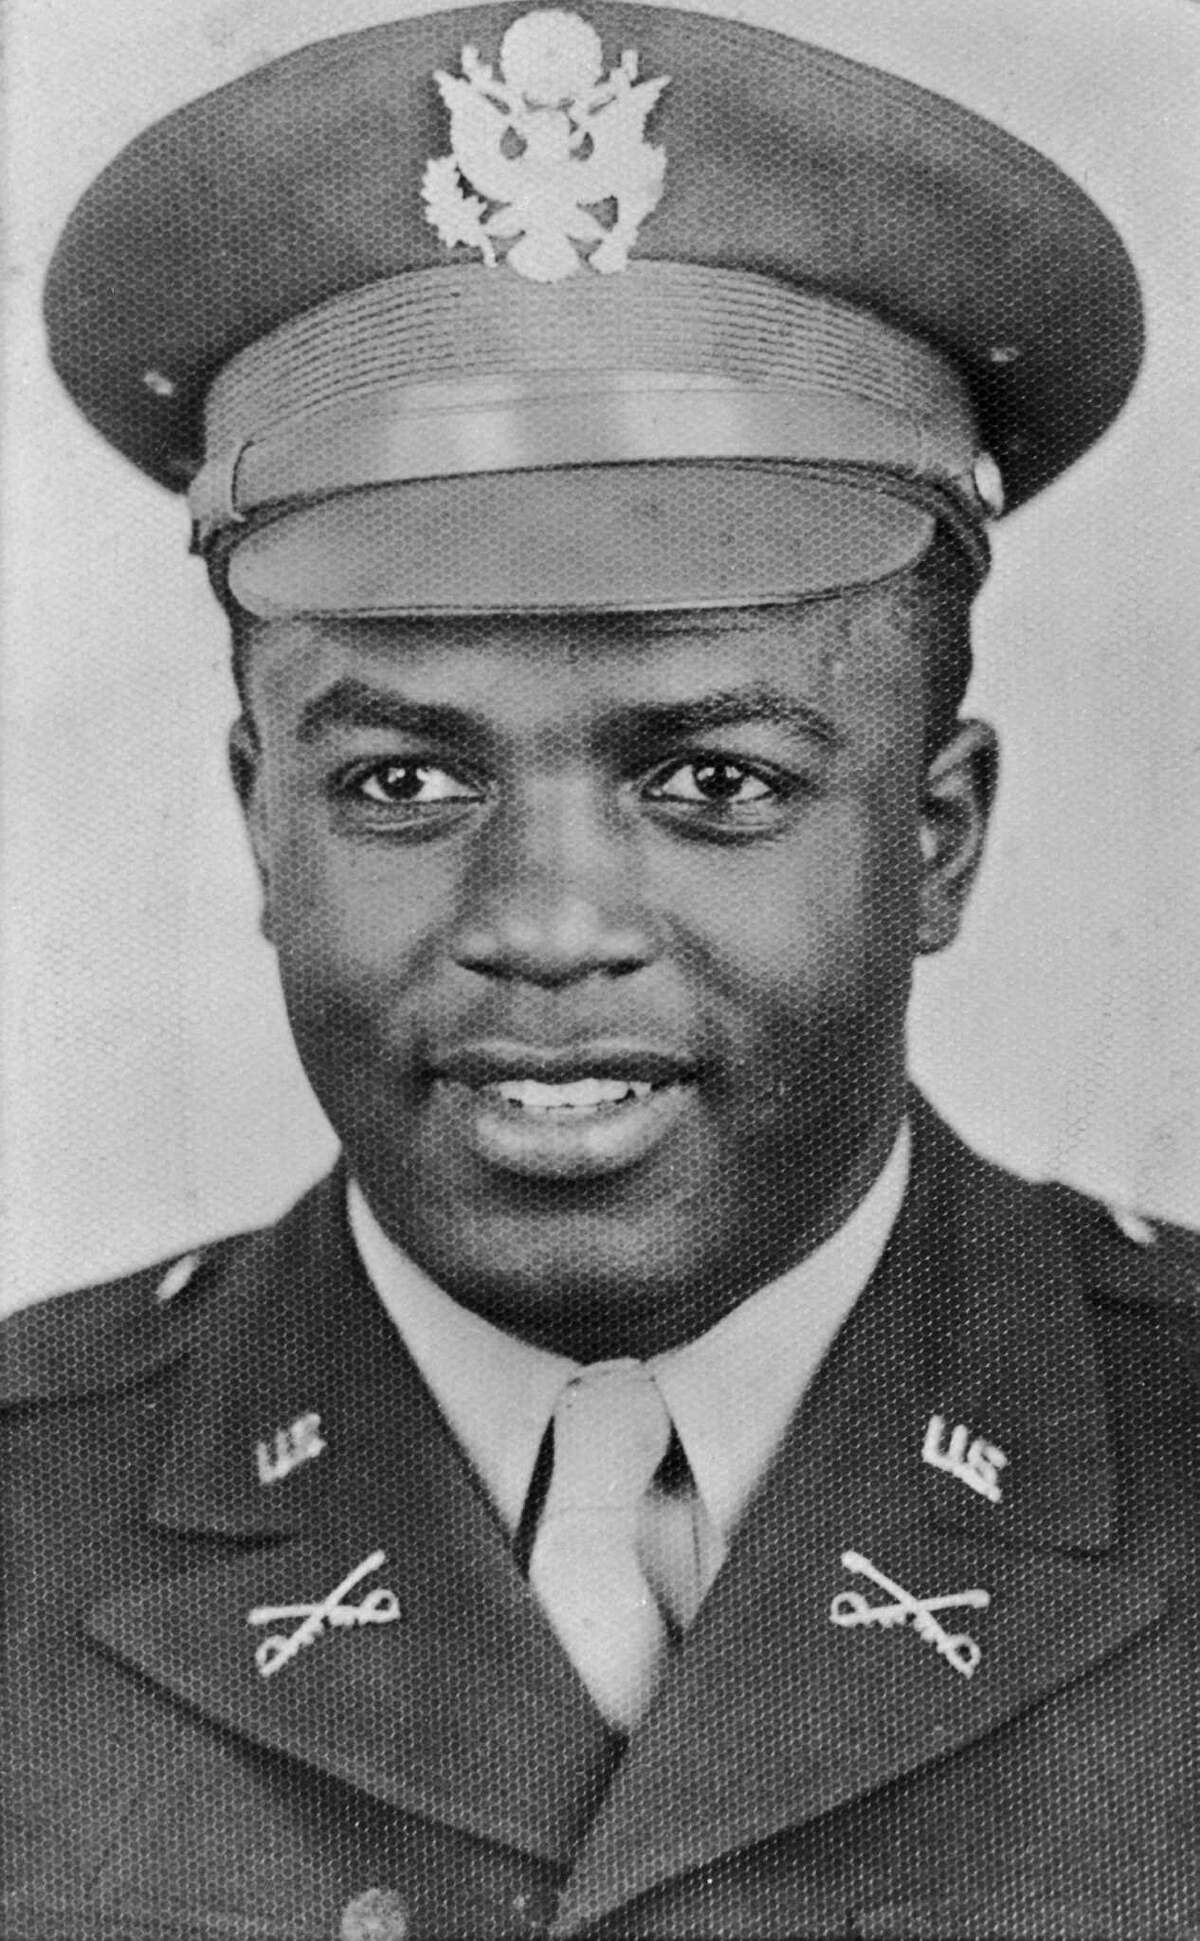 American baseball player Jackie Robinson during his wartime service as a second lieutenant in the United States Army, circa 1943.